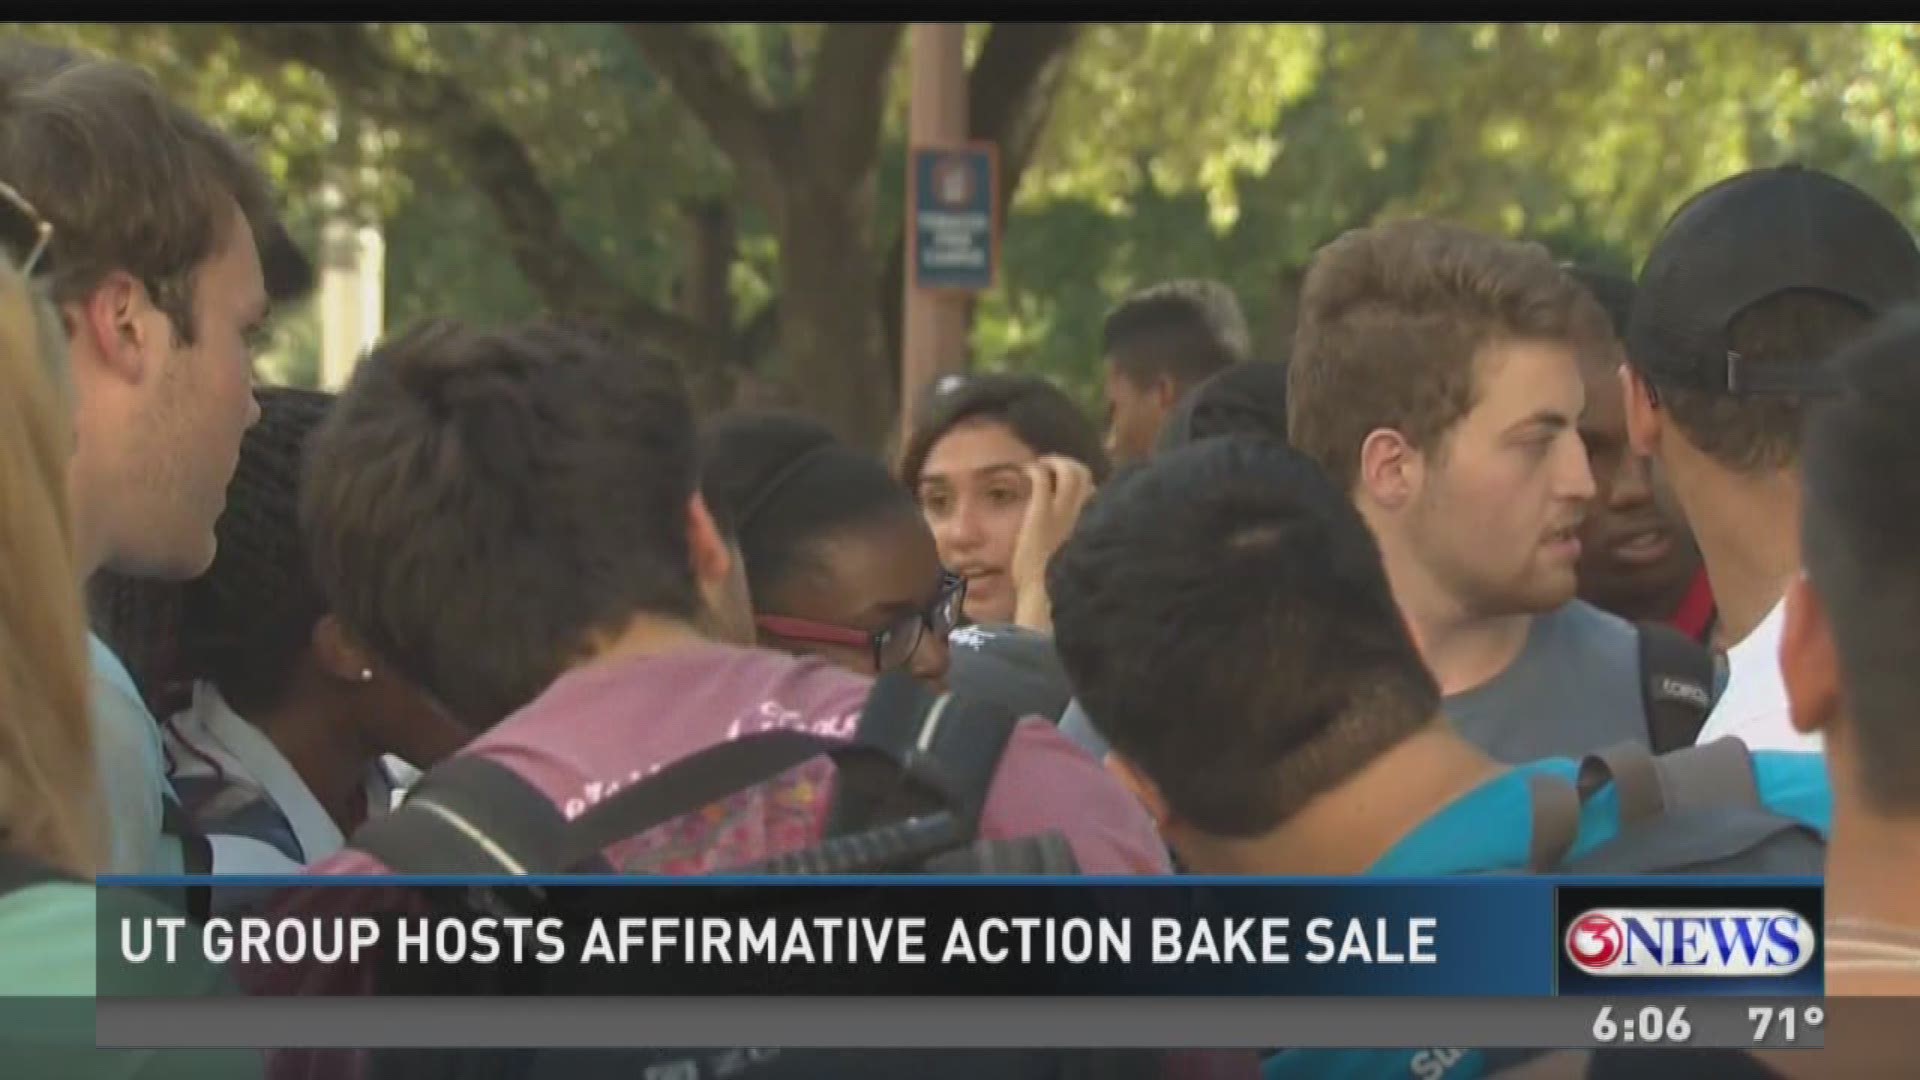 The Young Conservatives of Texas chapter at the University of Texas at Austin sparked a protest with an affirmative action bake sale on campus Wednesday afternoon.